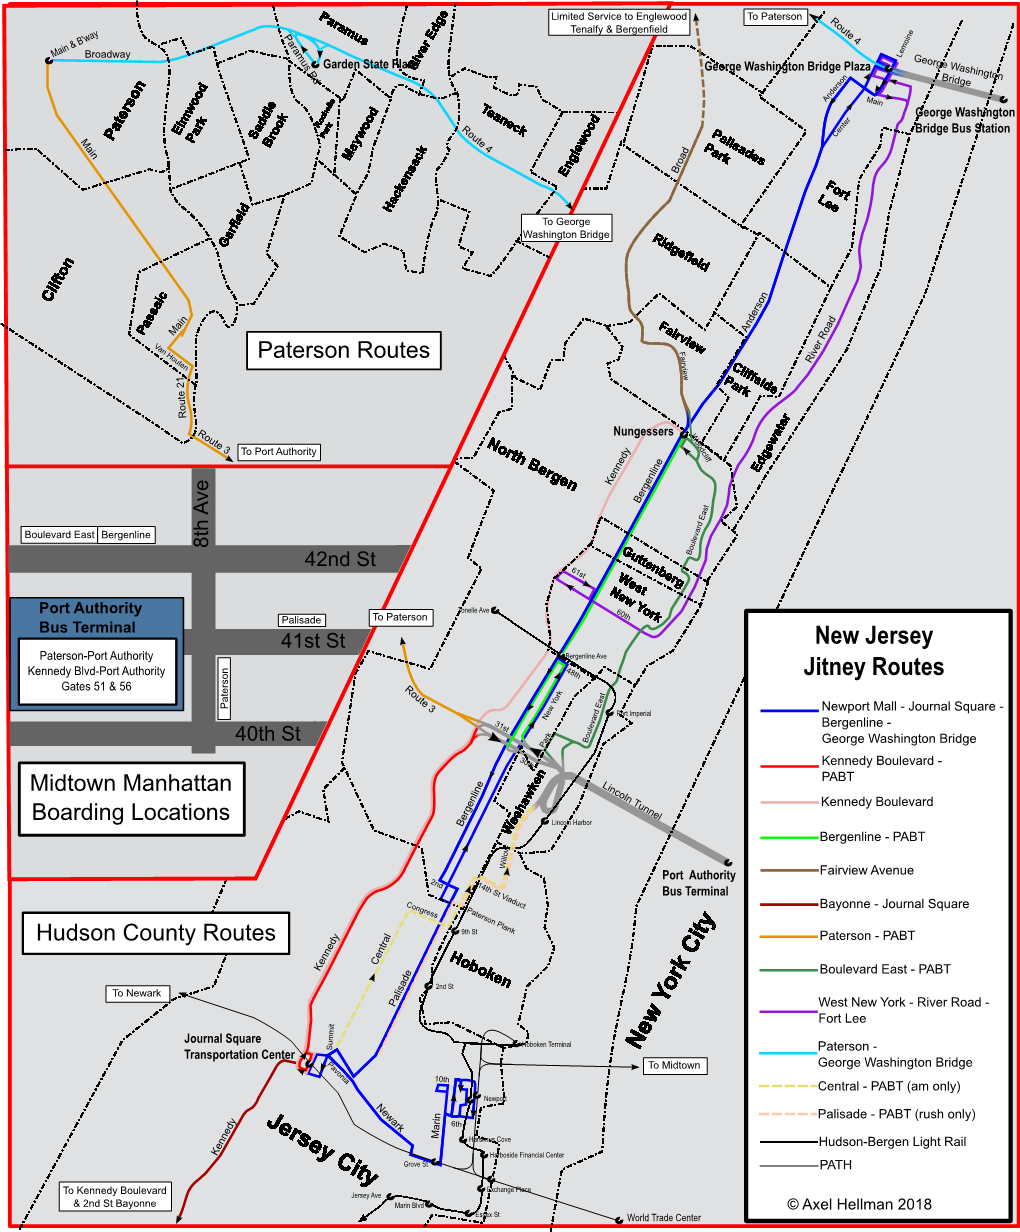 New Jersey Jitney Routes